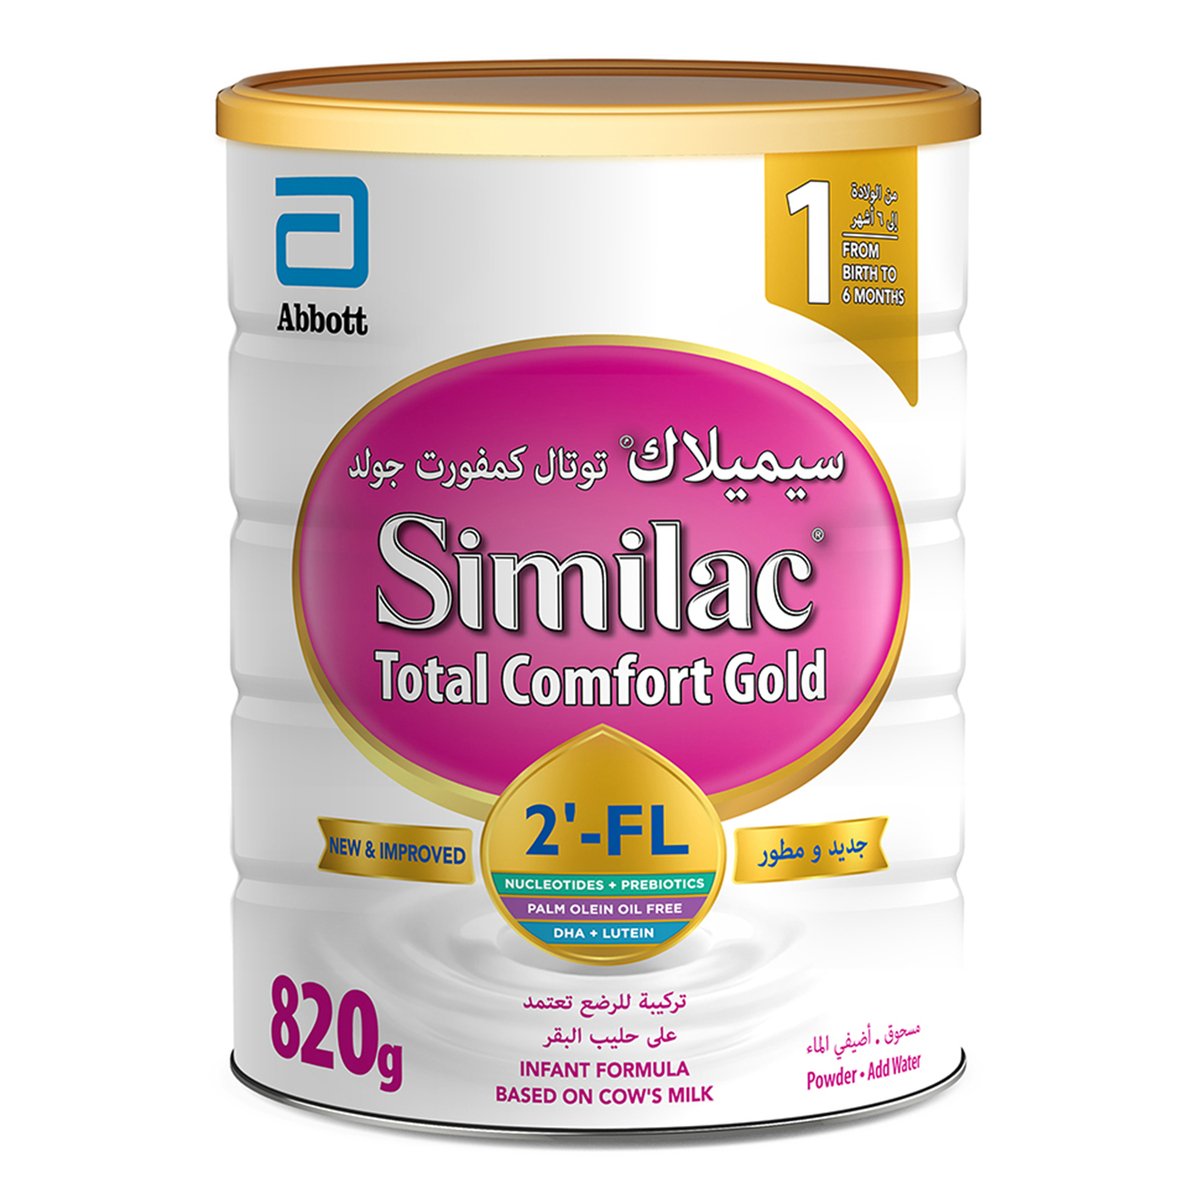 Buy Similac Total Comfort Gold 2-FL Stage 1 From Birth To 6 Months 820 g Online at Best Price | Baby milk powders & formula | Lulu Kuwait in UAE